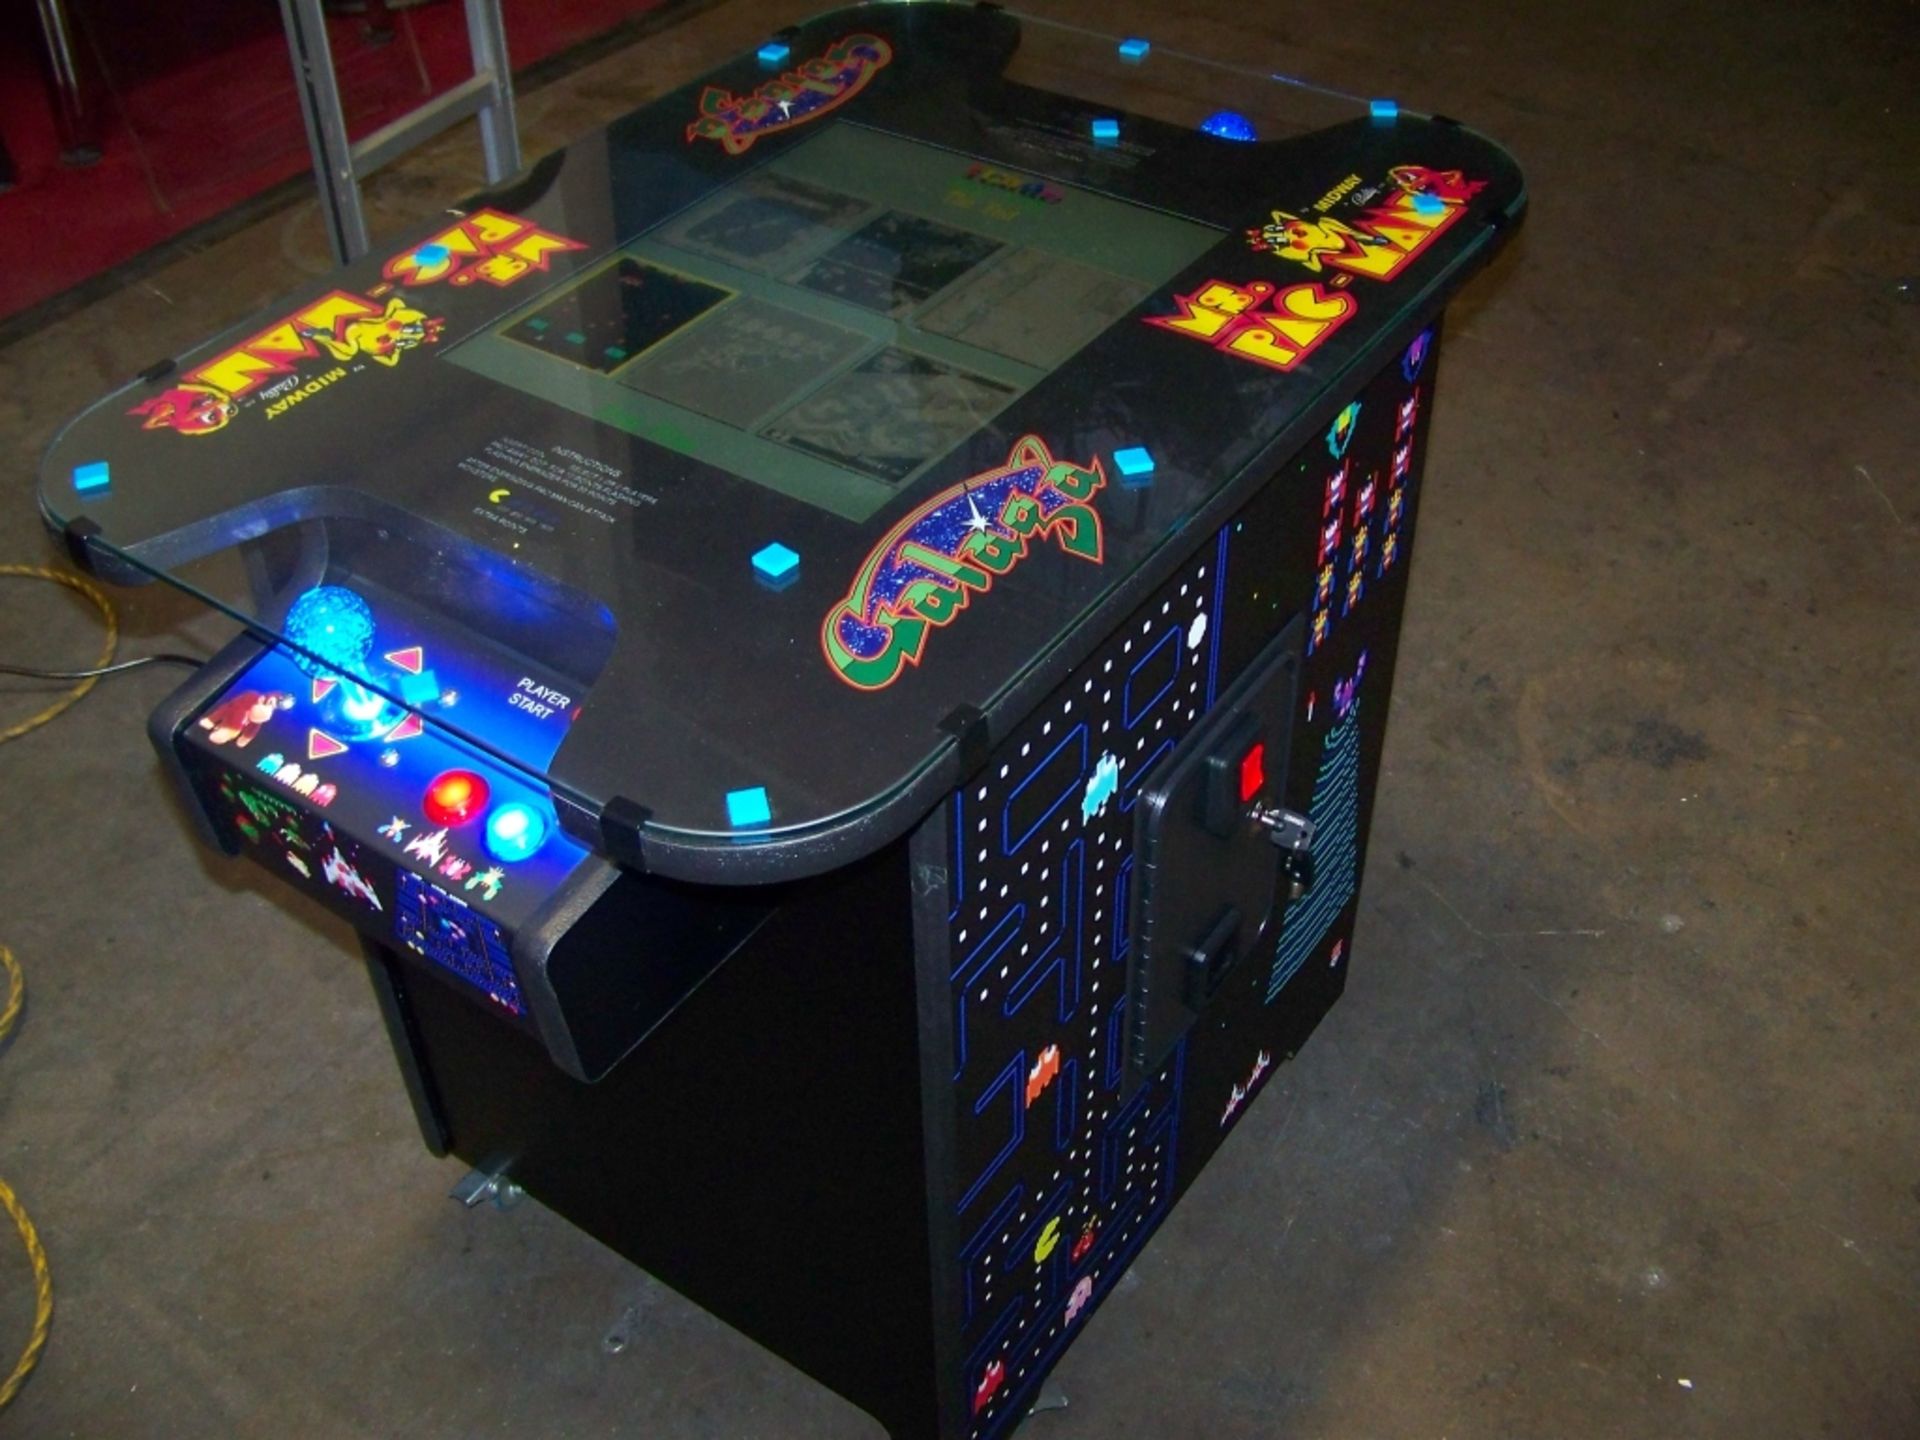 60 IN 1 BRAND NEW MULTICADE TABLE ARCADE L@@K!!! - Image 2 of 5